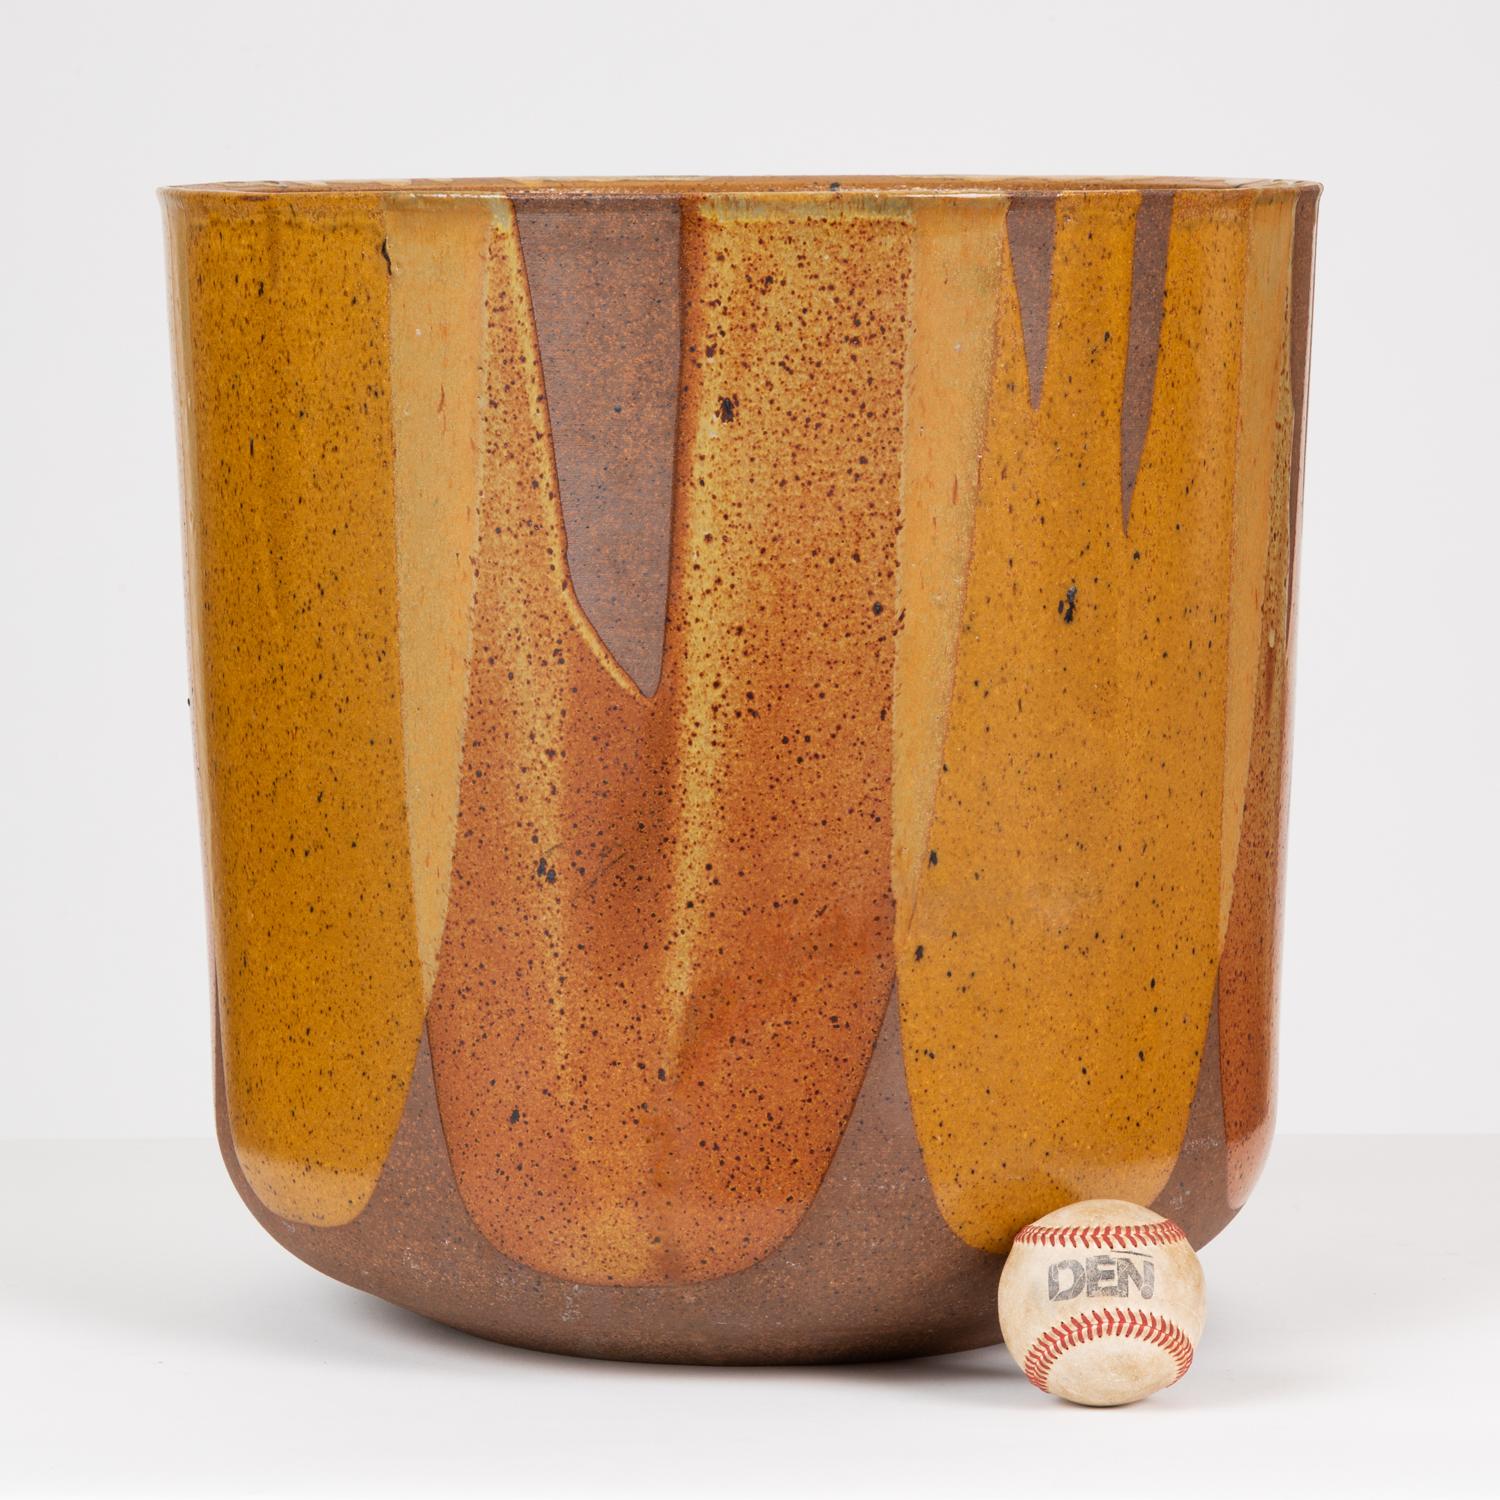 Malcolm Leland’s tulip-shaped LT-24 planter for Architectural Pottery with David Cressey's Pro/Artisan “Flame Glaze.” This planter has a rounded bottom that widens towards the opening, a simple shape rendered dramatic by the variegated glaze